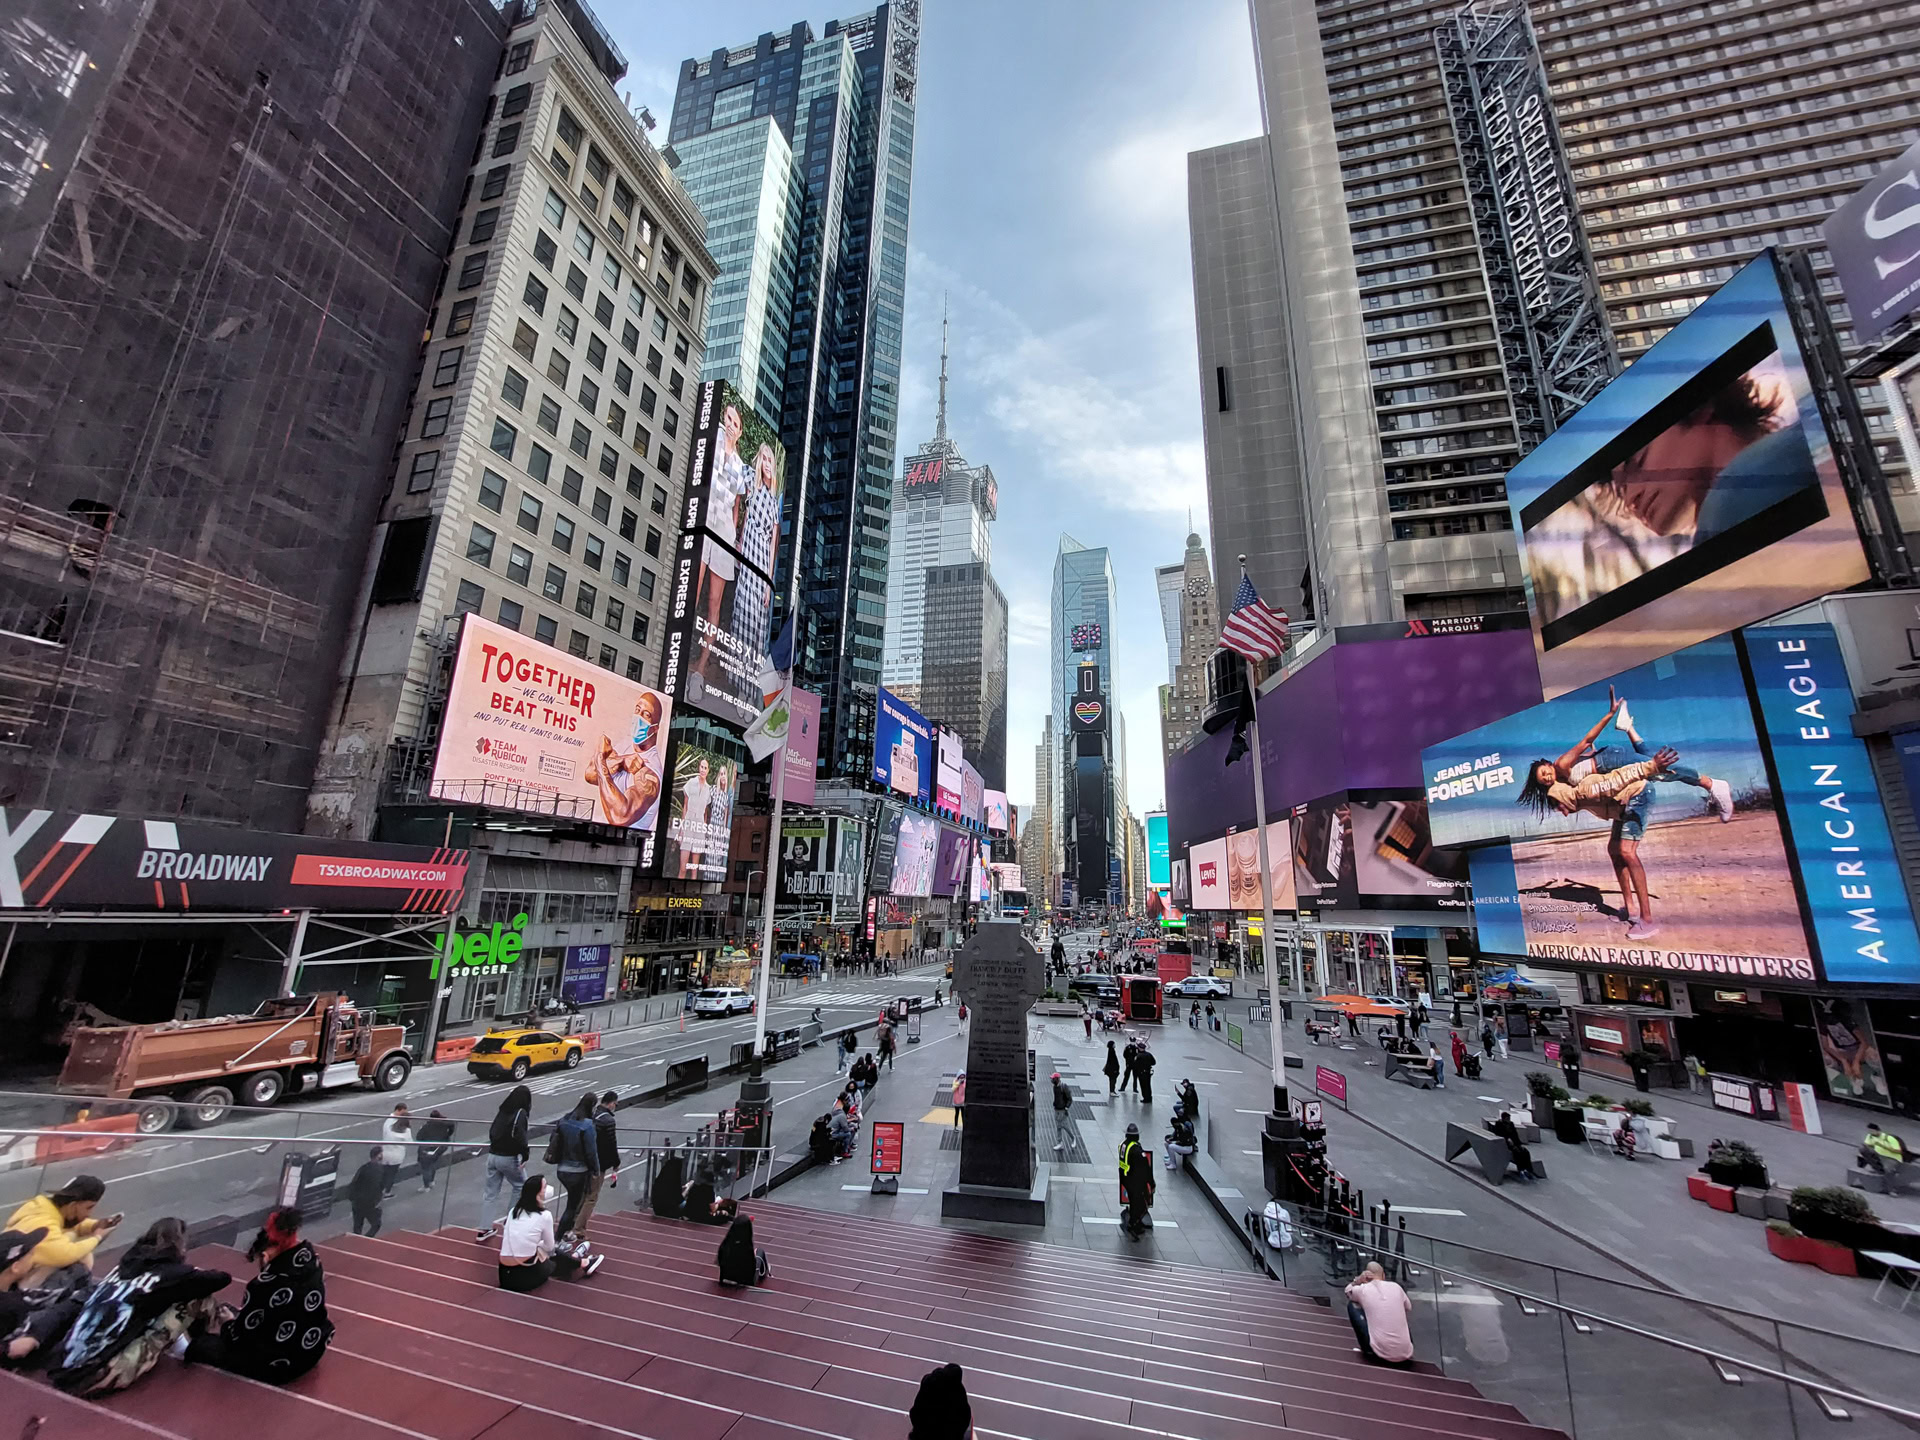 Samsung Galaxy A 52 5G photo sample times square wide angle